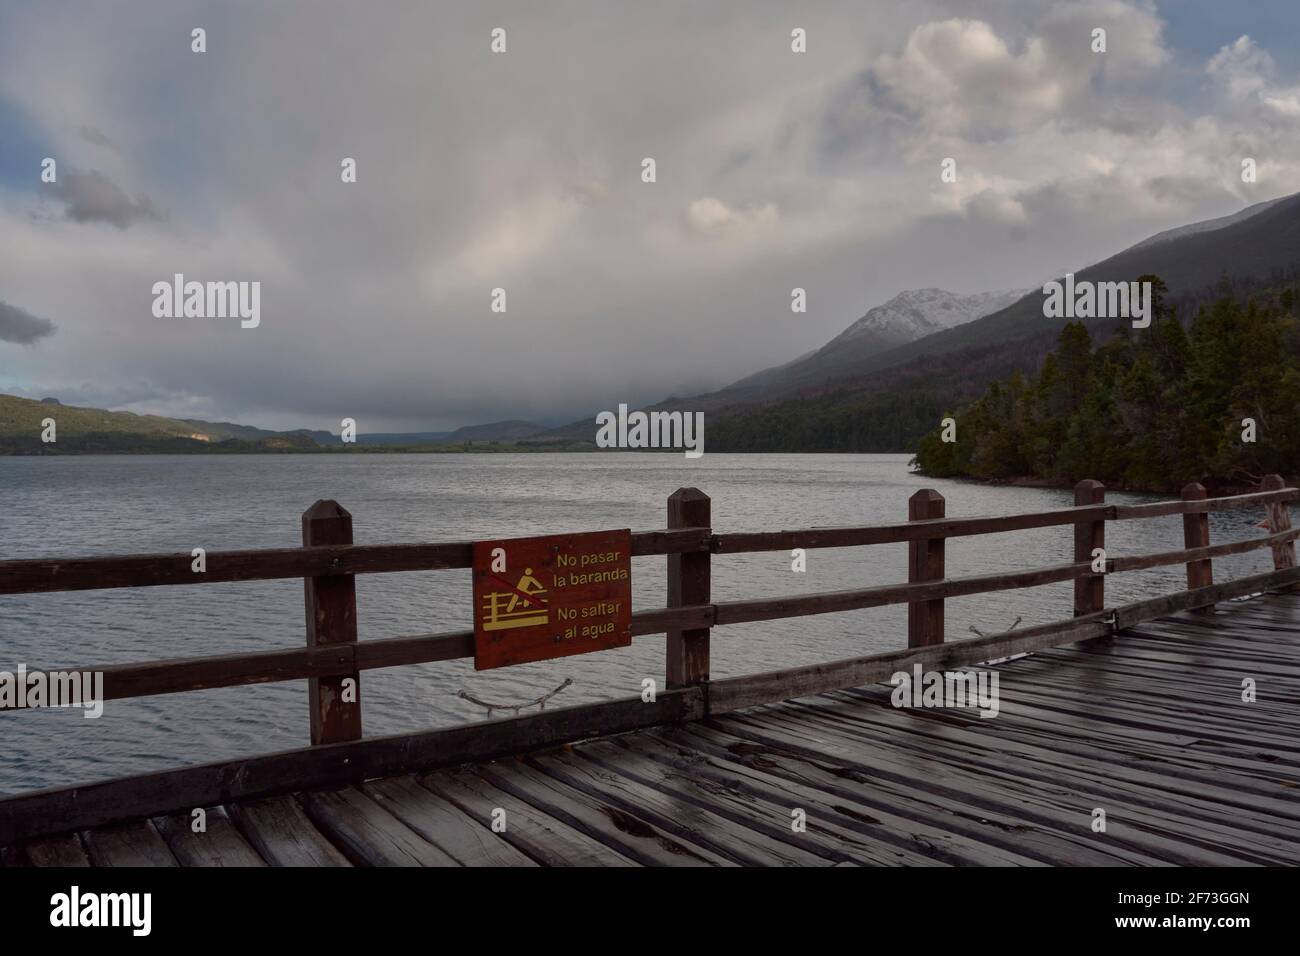 Wooden pier on the lake, Los Alerces National Park, Patagonia, Argentina Stock Photo